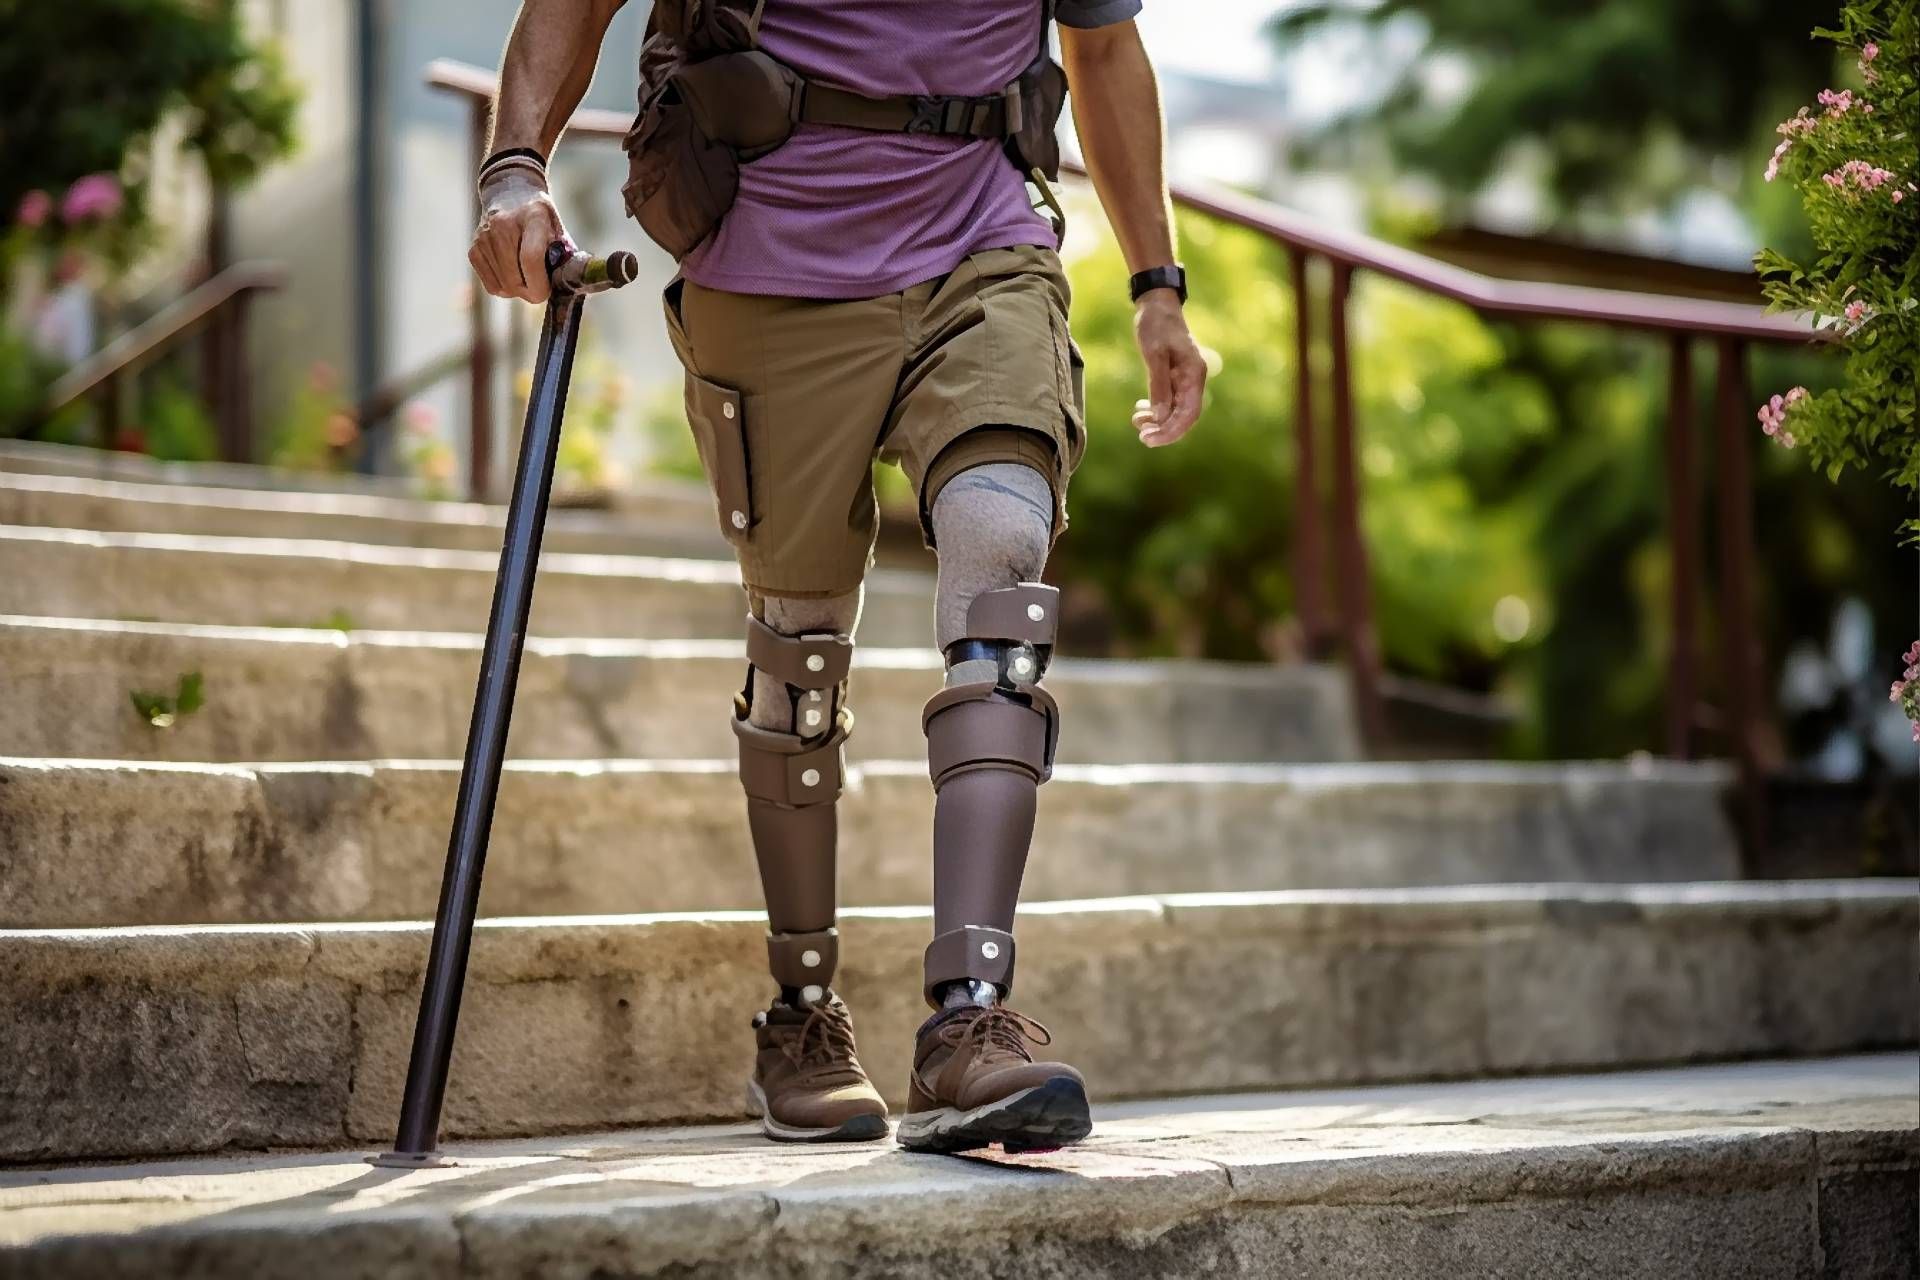 A prosthetic user with an artificial leg near Edgewood, Kentucky (KY) and Lawrenceburg, Indiana (IN)